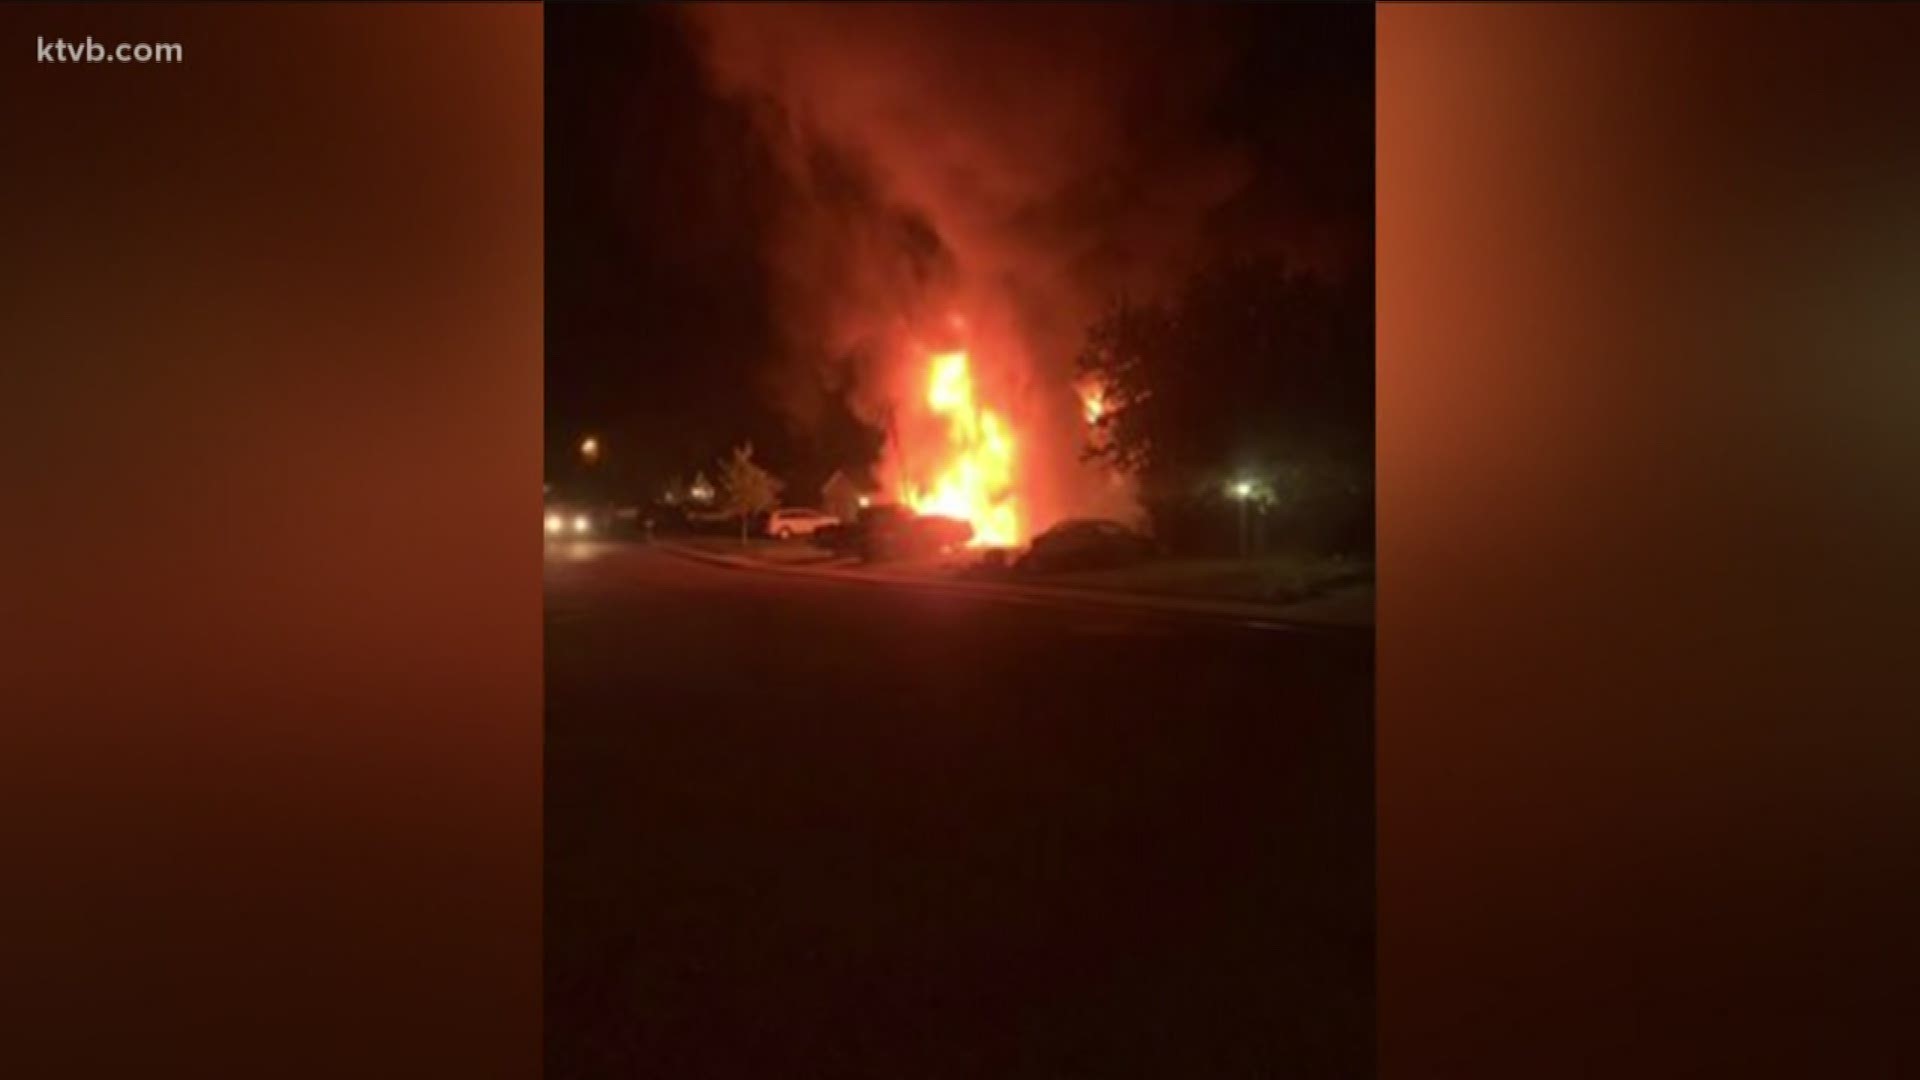 A late night fire on the 4th of July heavily damaged a Nampa home